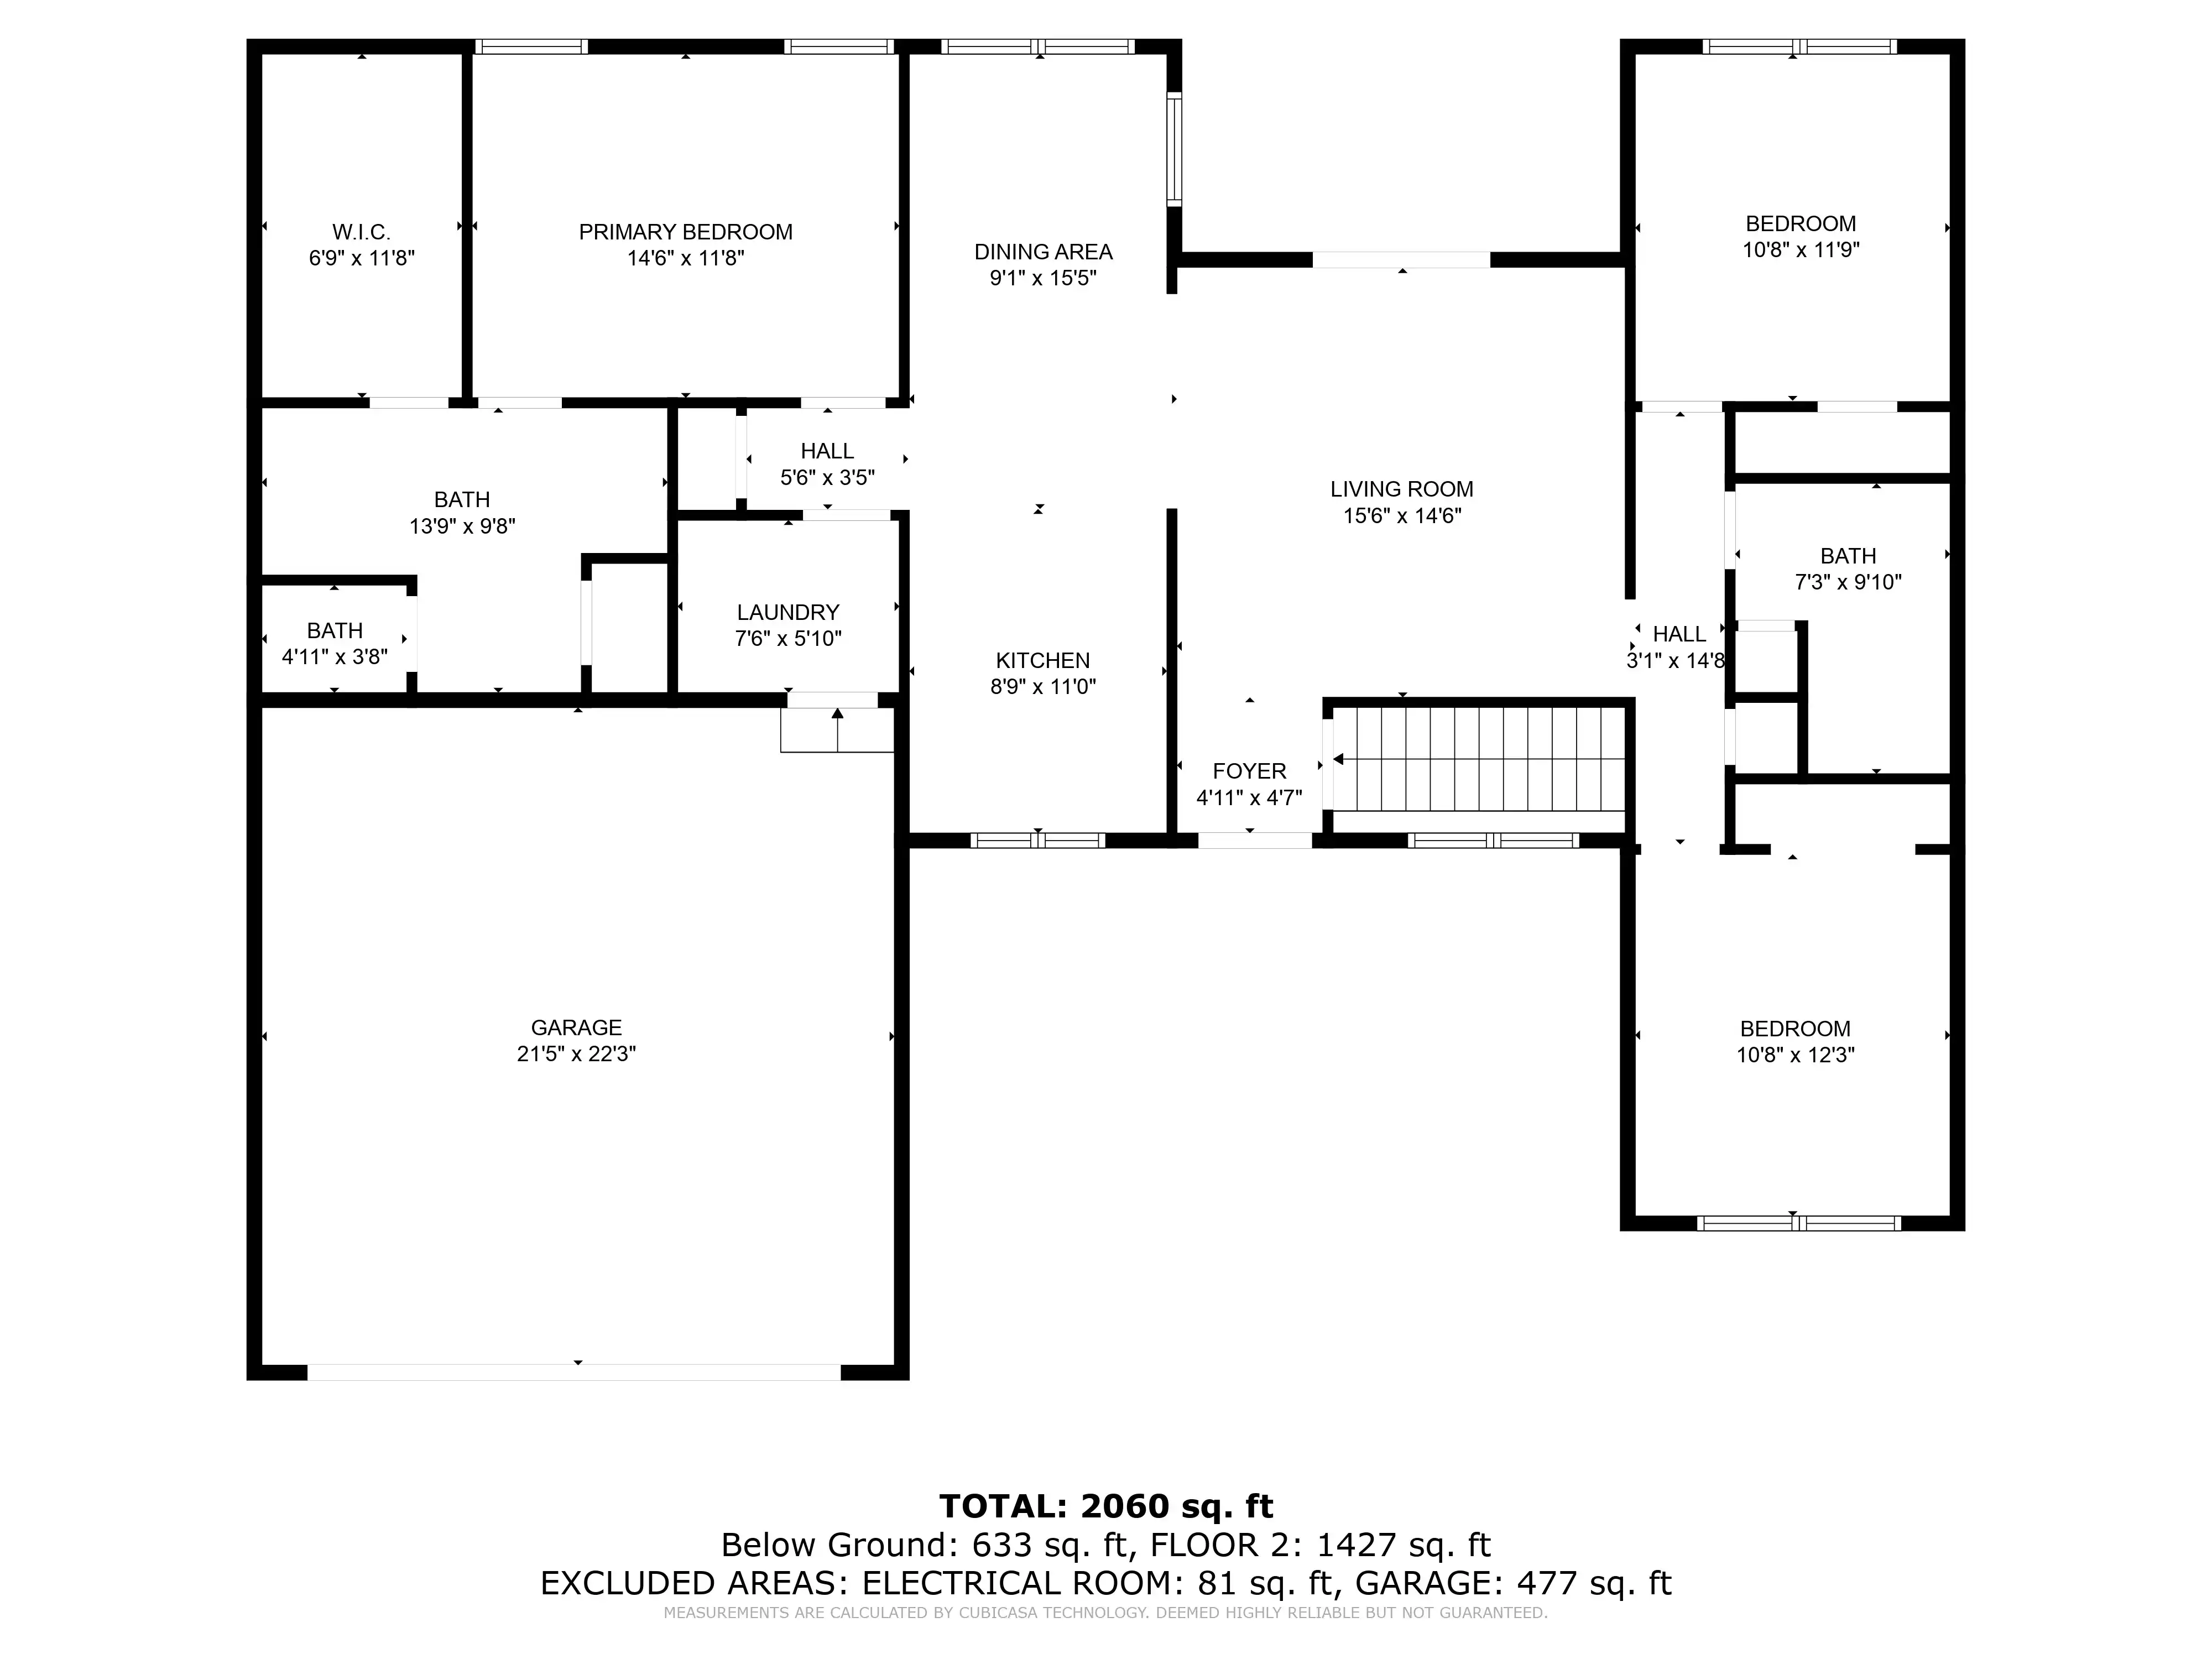 Floor plan of a multi-room residence displaying dimensions for various rooms including bedrooms, bathrooms, kitchen, living and dining areas, foyer, laundry, and garage. Total area is 2,060 square feet with additional specifications on the excluded areas.